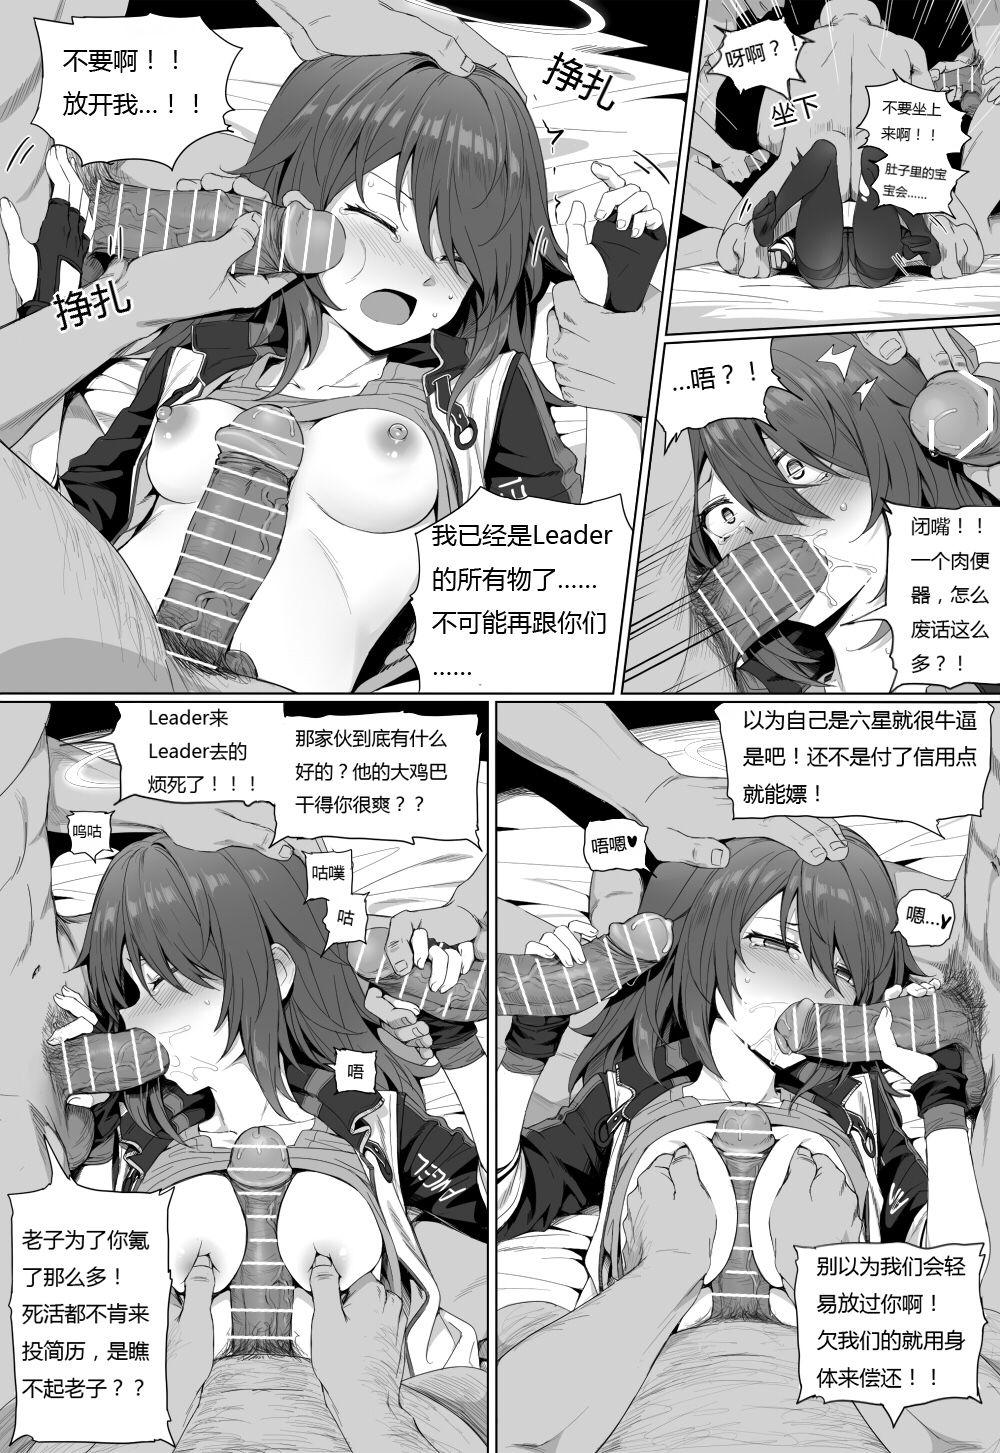 Classroom Impotent Fury - Arknights 1080p - Page 7